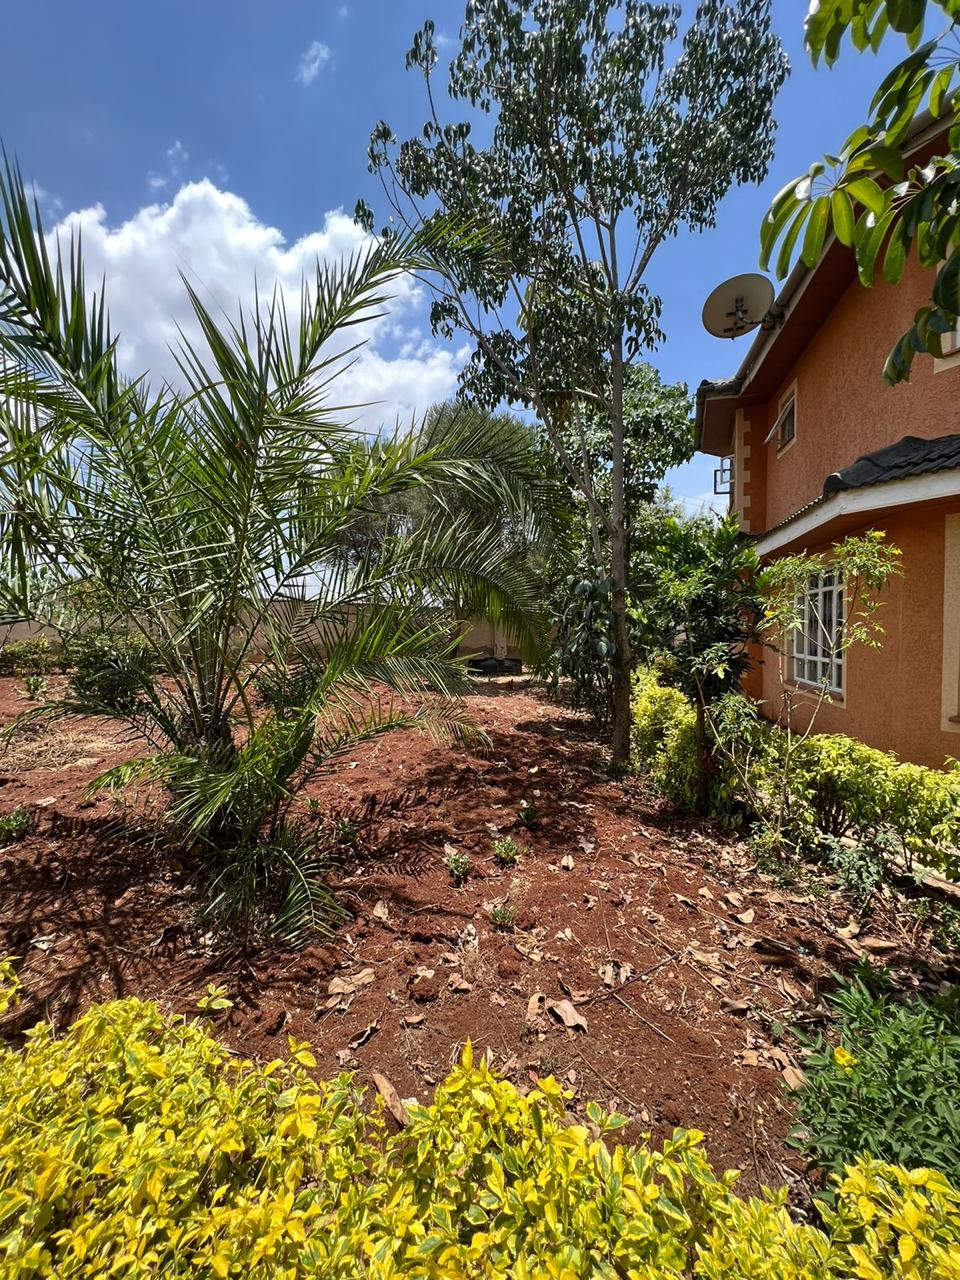 4 Bedroom House siting on 3/4 acres in kitengela . Has Solar water heater, Inverter for power backup. Near malls and schools. PRICE 48M